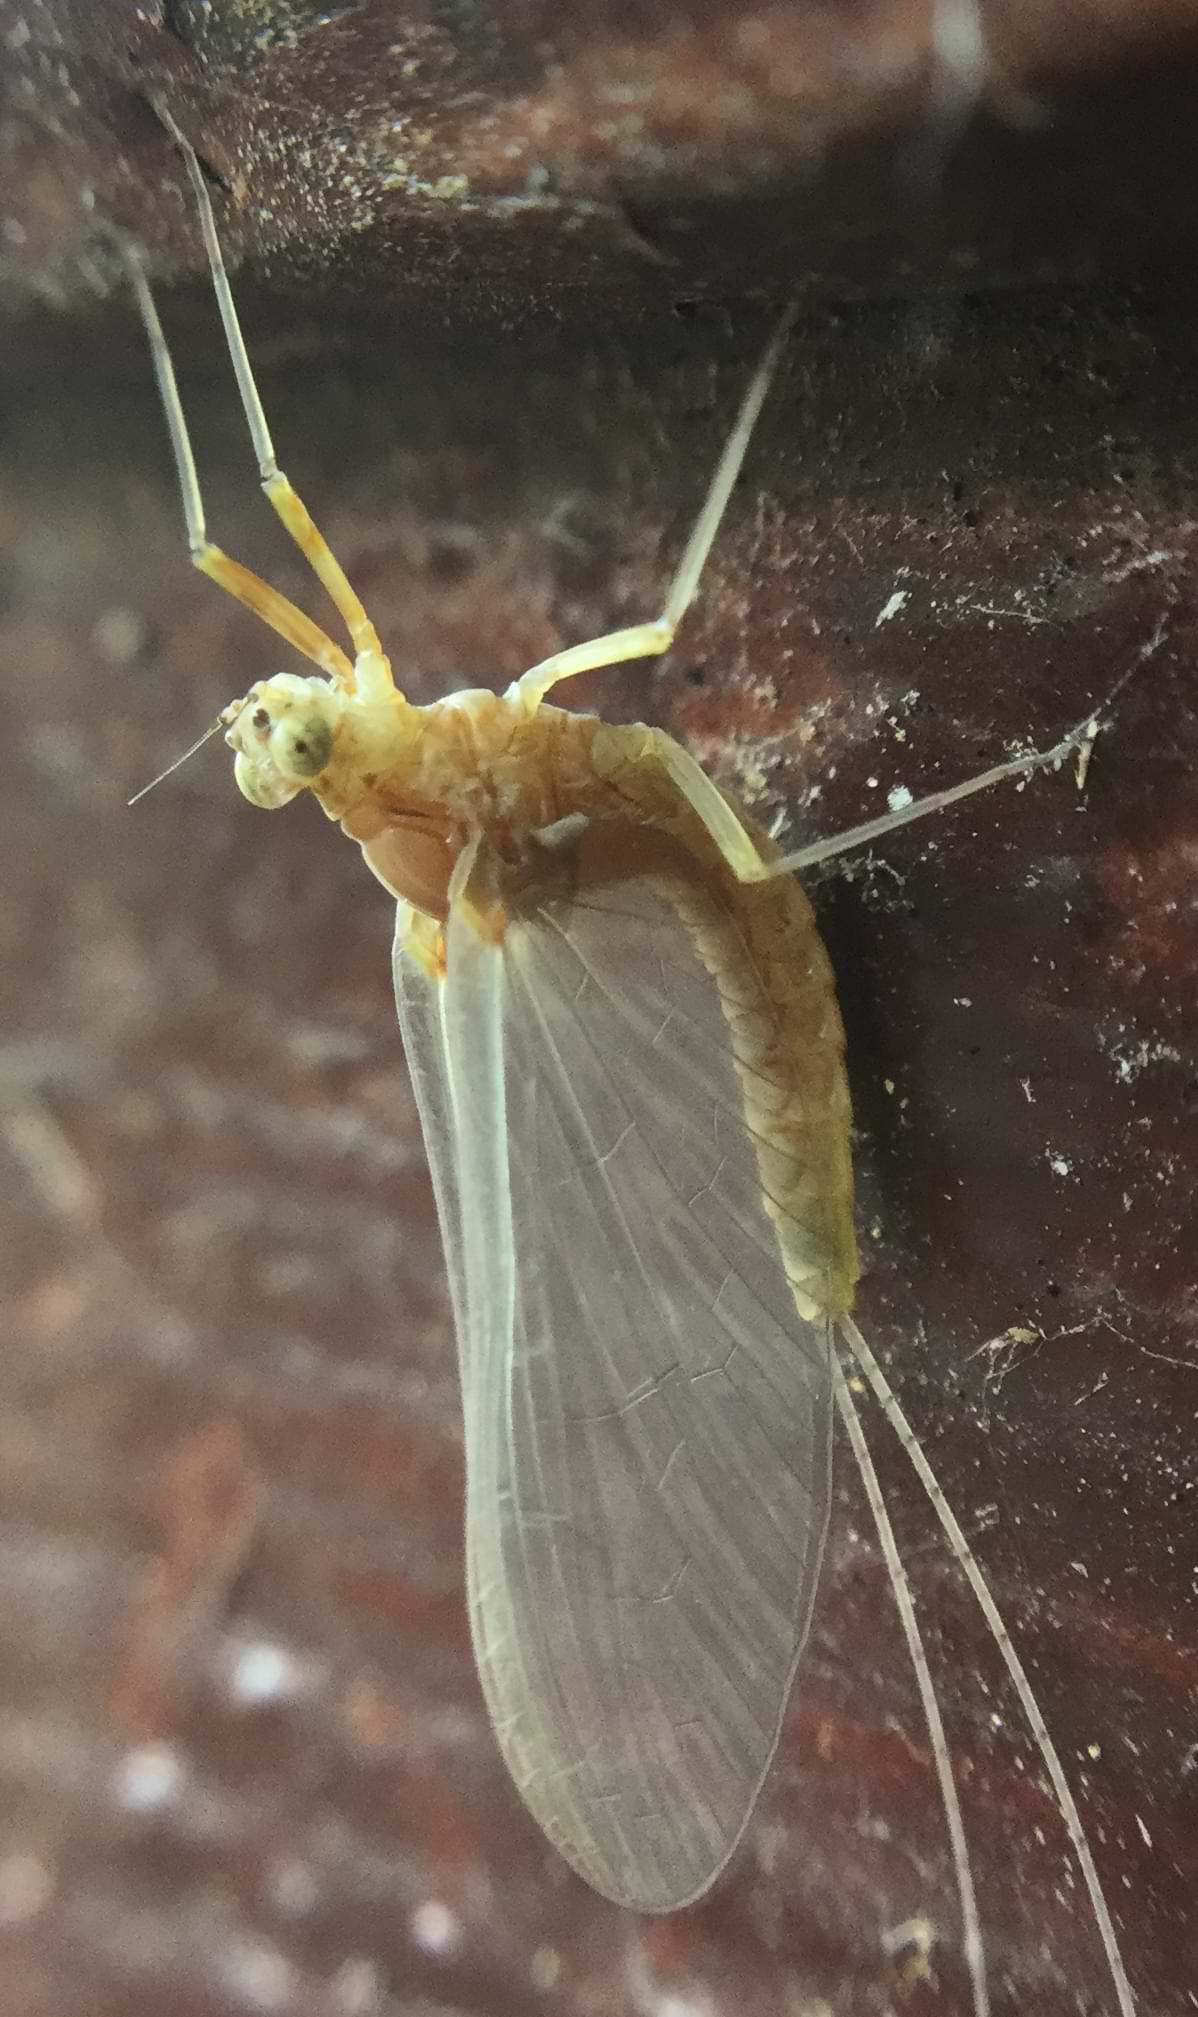 A green mayfly with large transparent wings resting upside down on a wall.